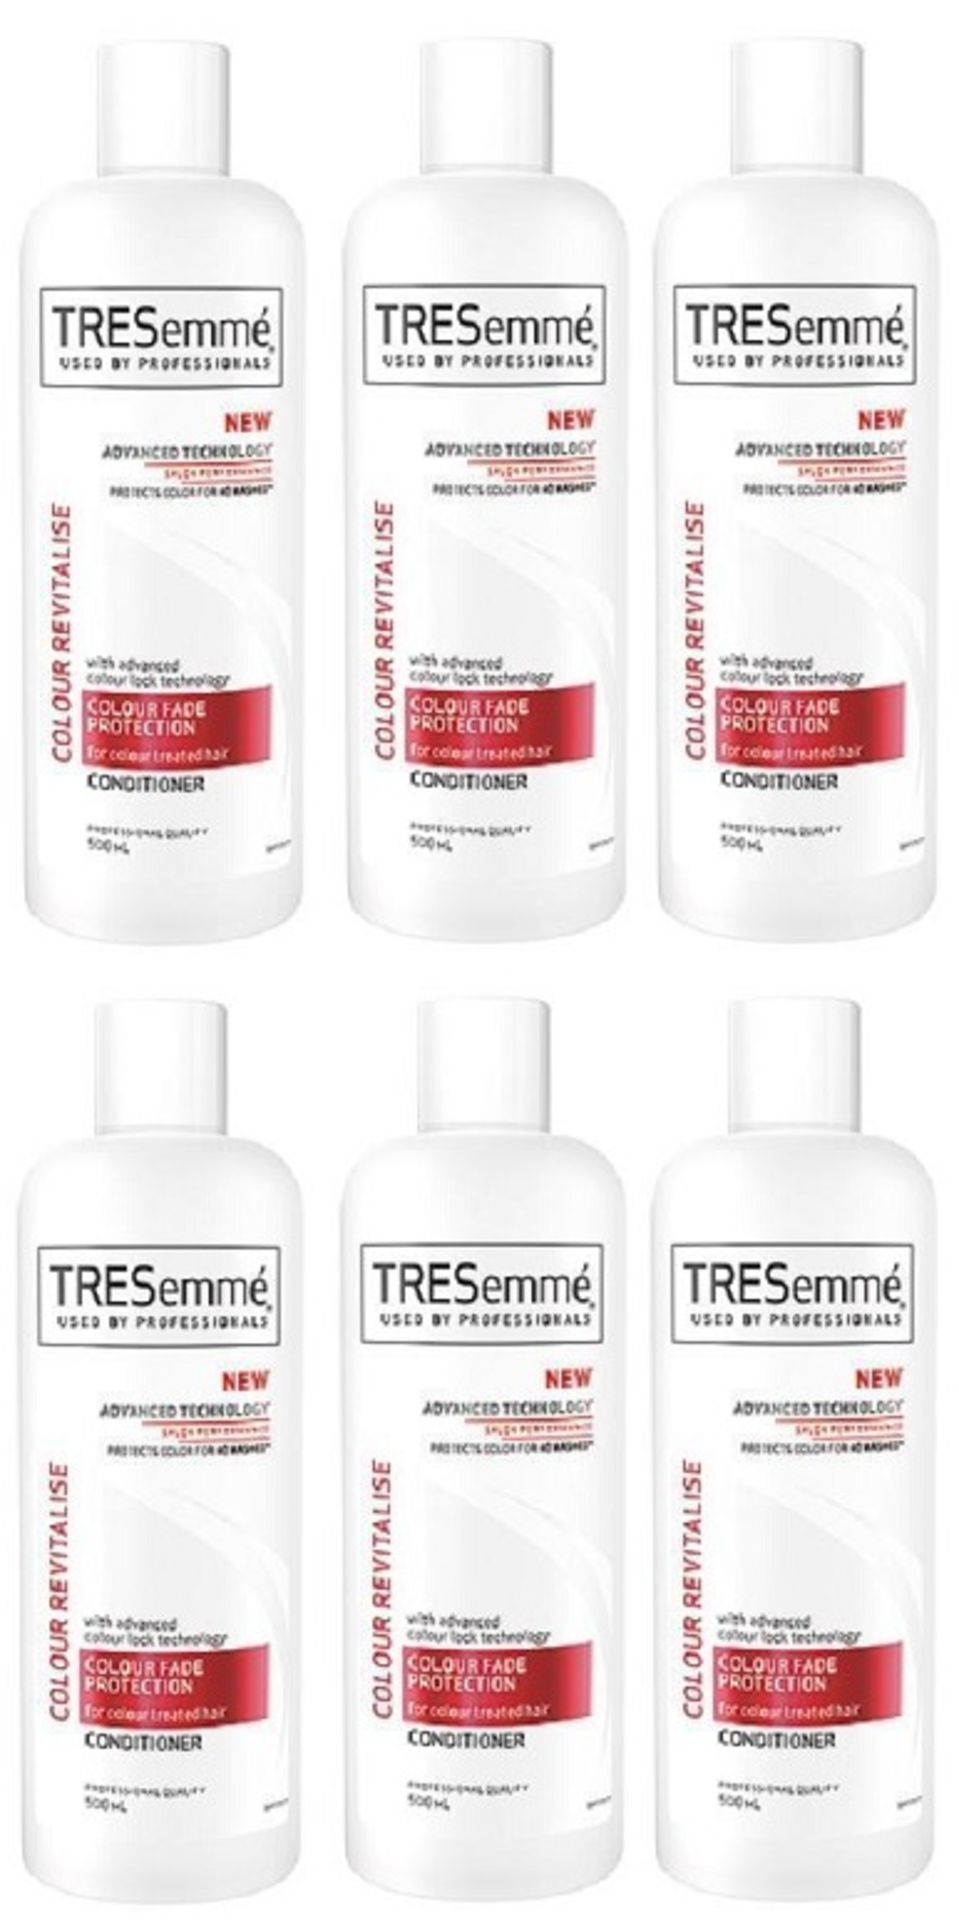 V Brand New Lot Of 6 TRESemme Professional Colour Fade Protection Conditioner 500ml For Colour